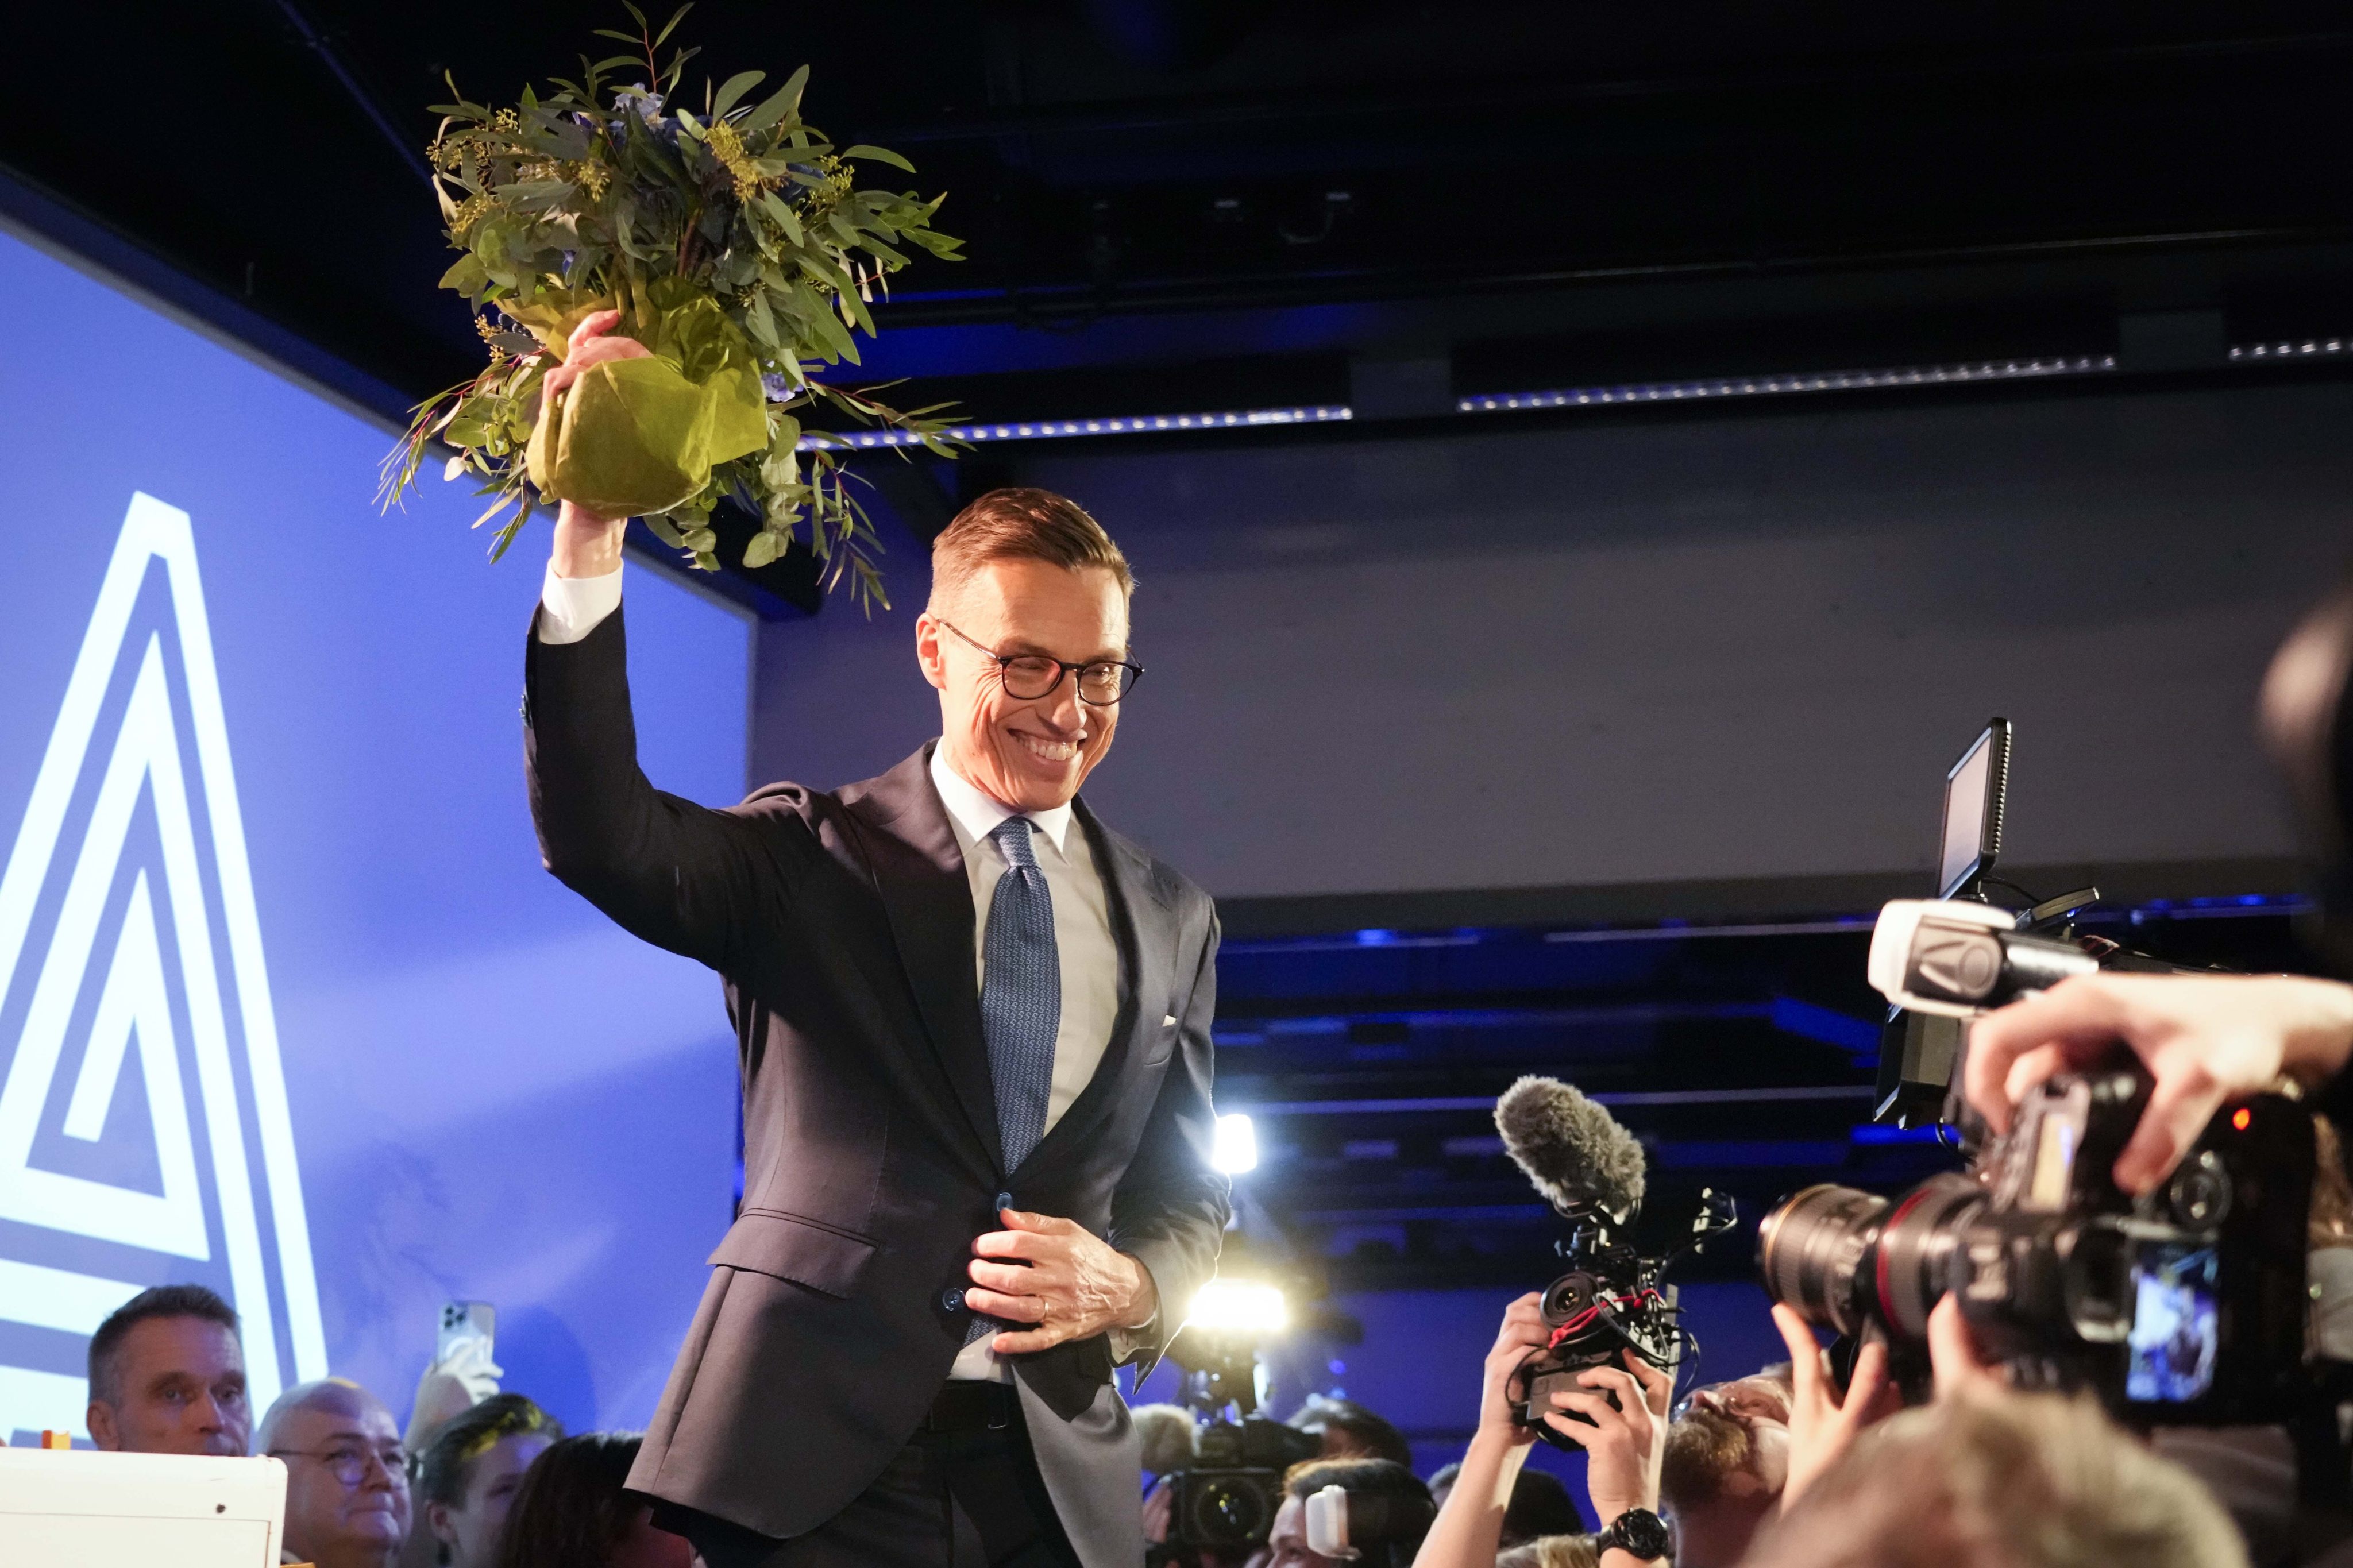 Alexander Stubb celebrates after winning the second round of the presidential election. Photo: AP